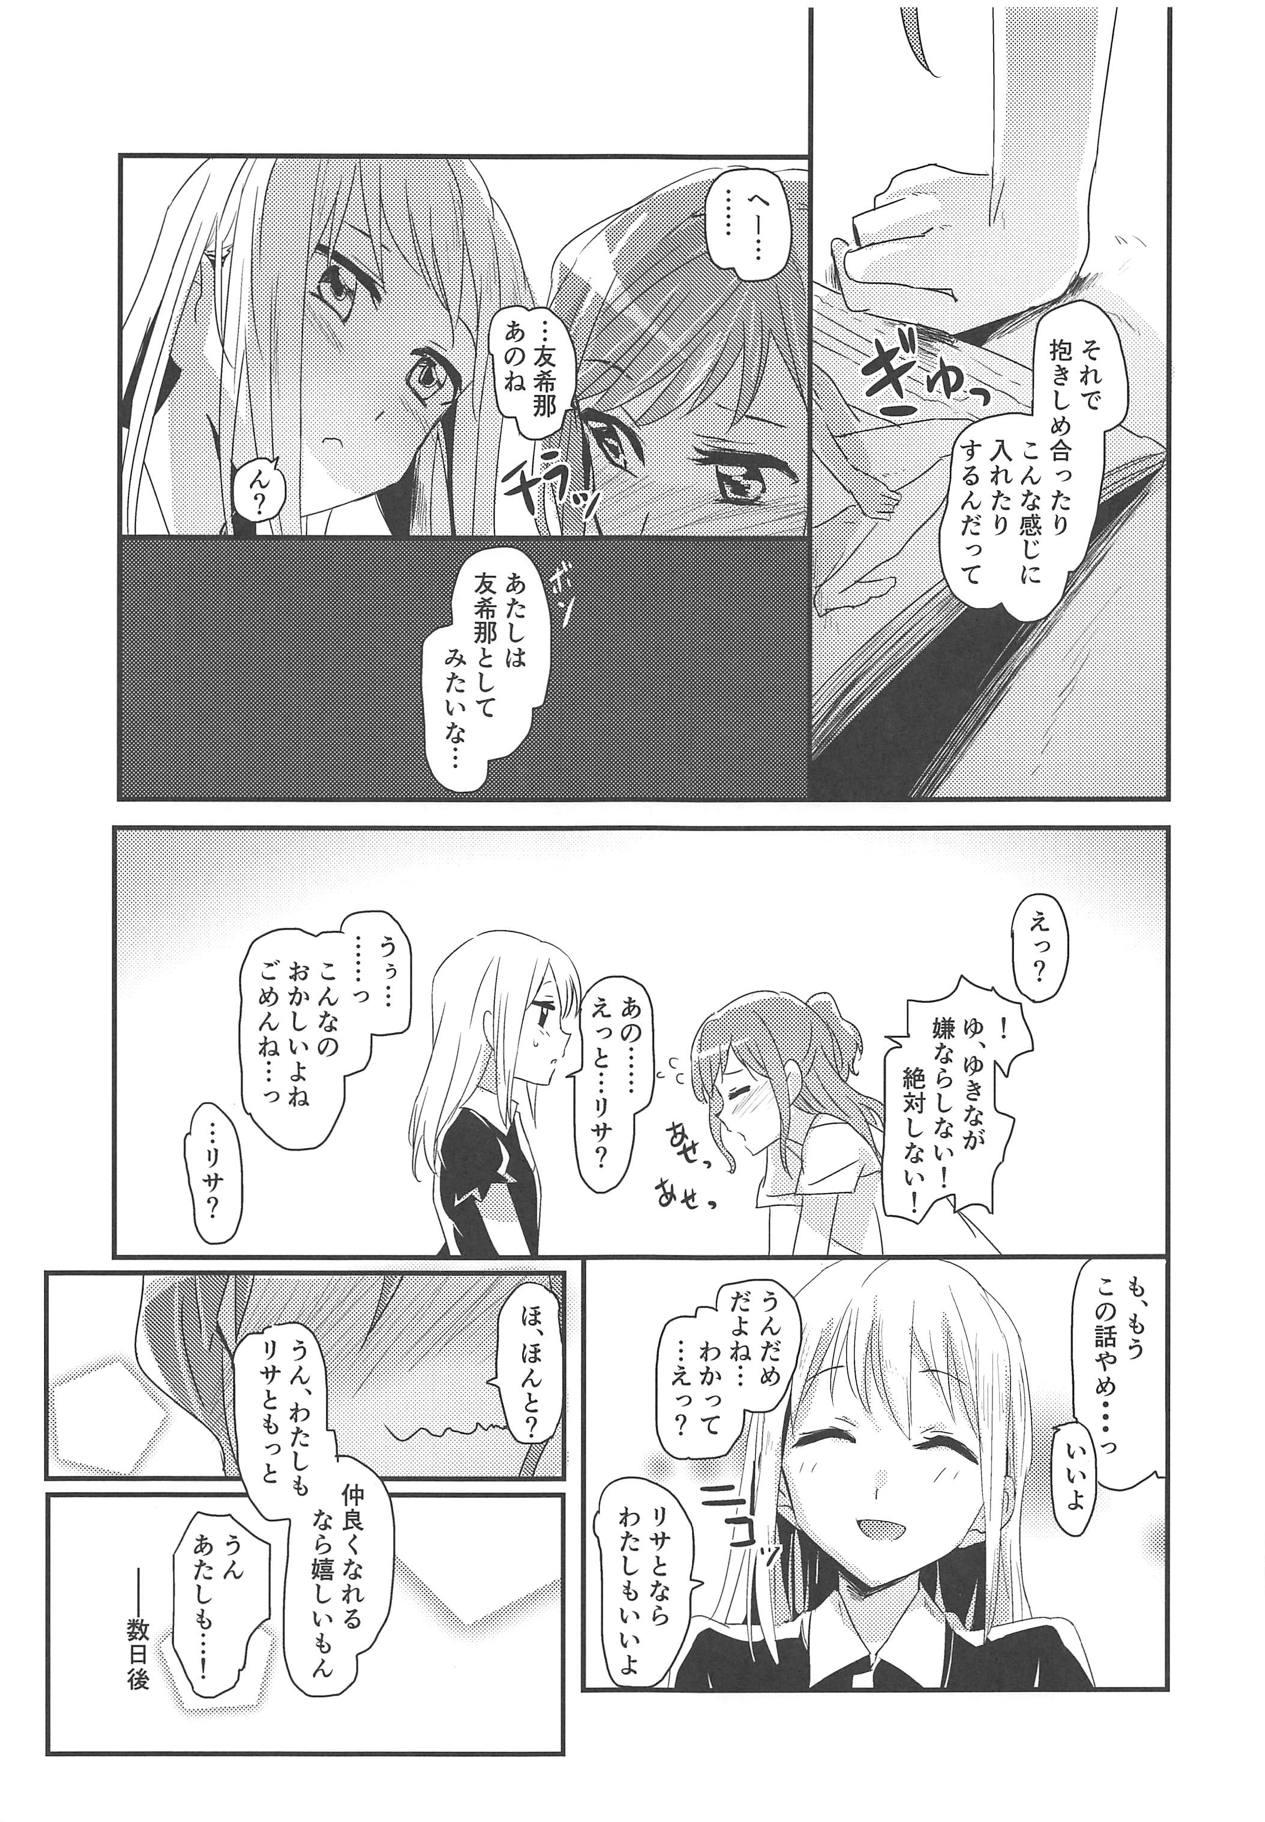 Missionary Serenade - Bang dream Africa - Page 6